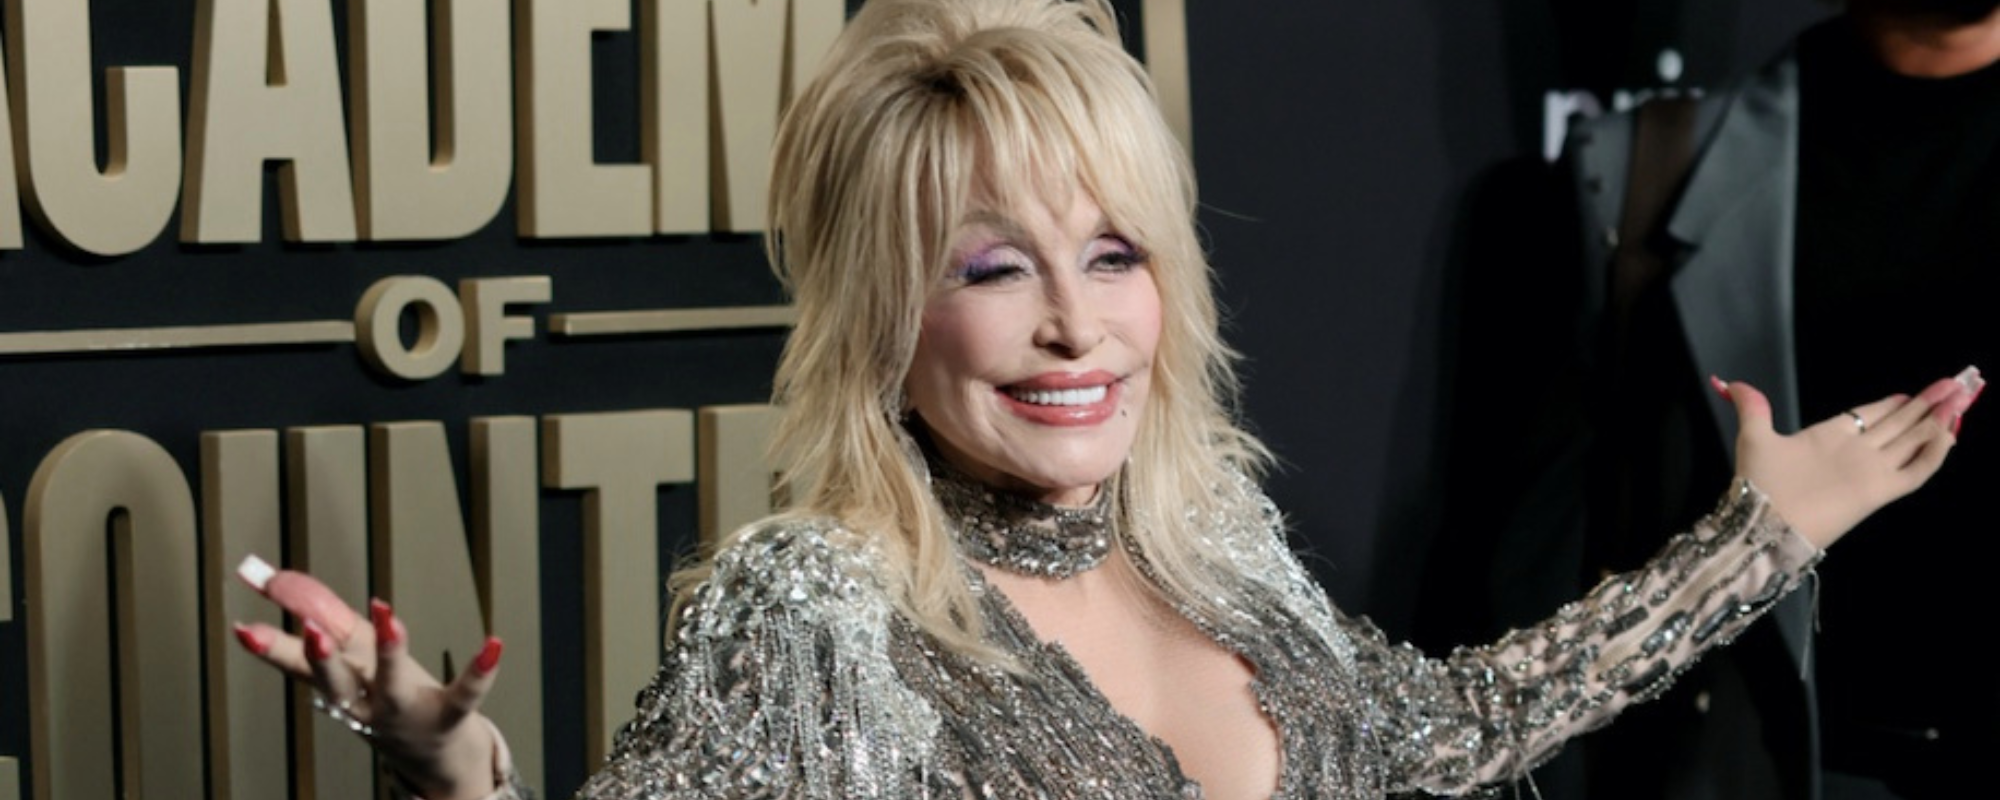 Dolly Parton Reveals the Music Stars Who Didn’t Make It Onto ‘Rockstar’